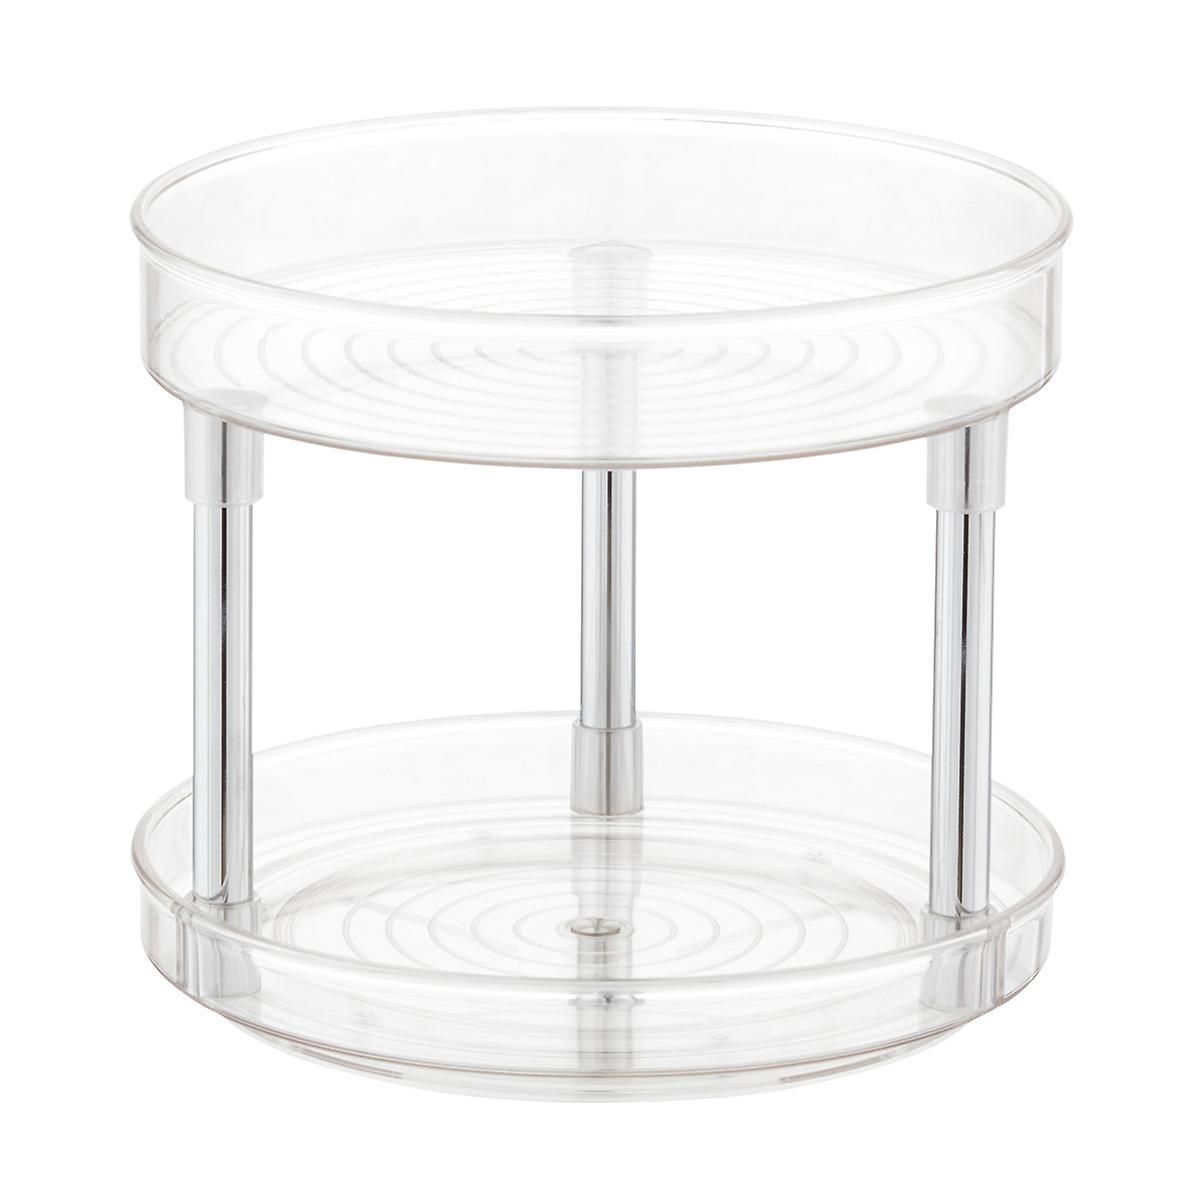 iDesign Linus 2-Tier Lazy Susan | The Container Store